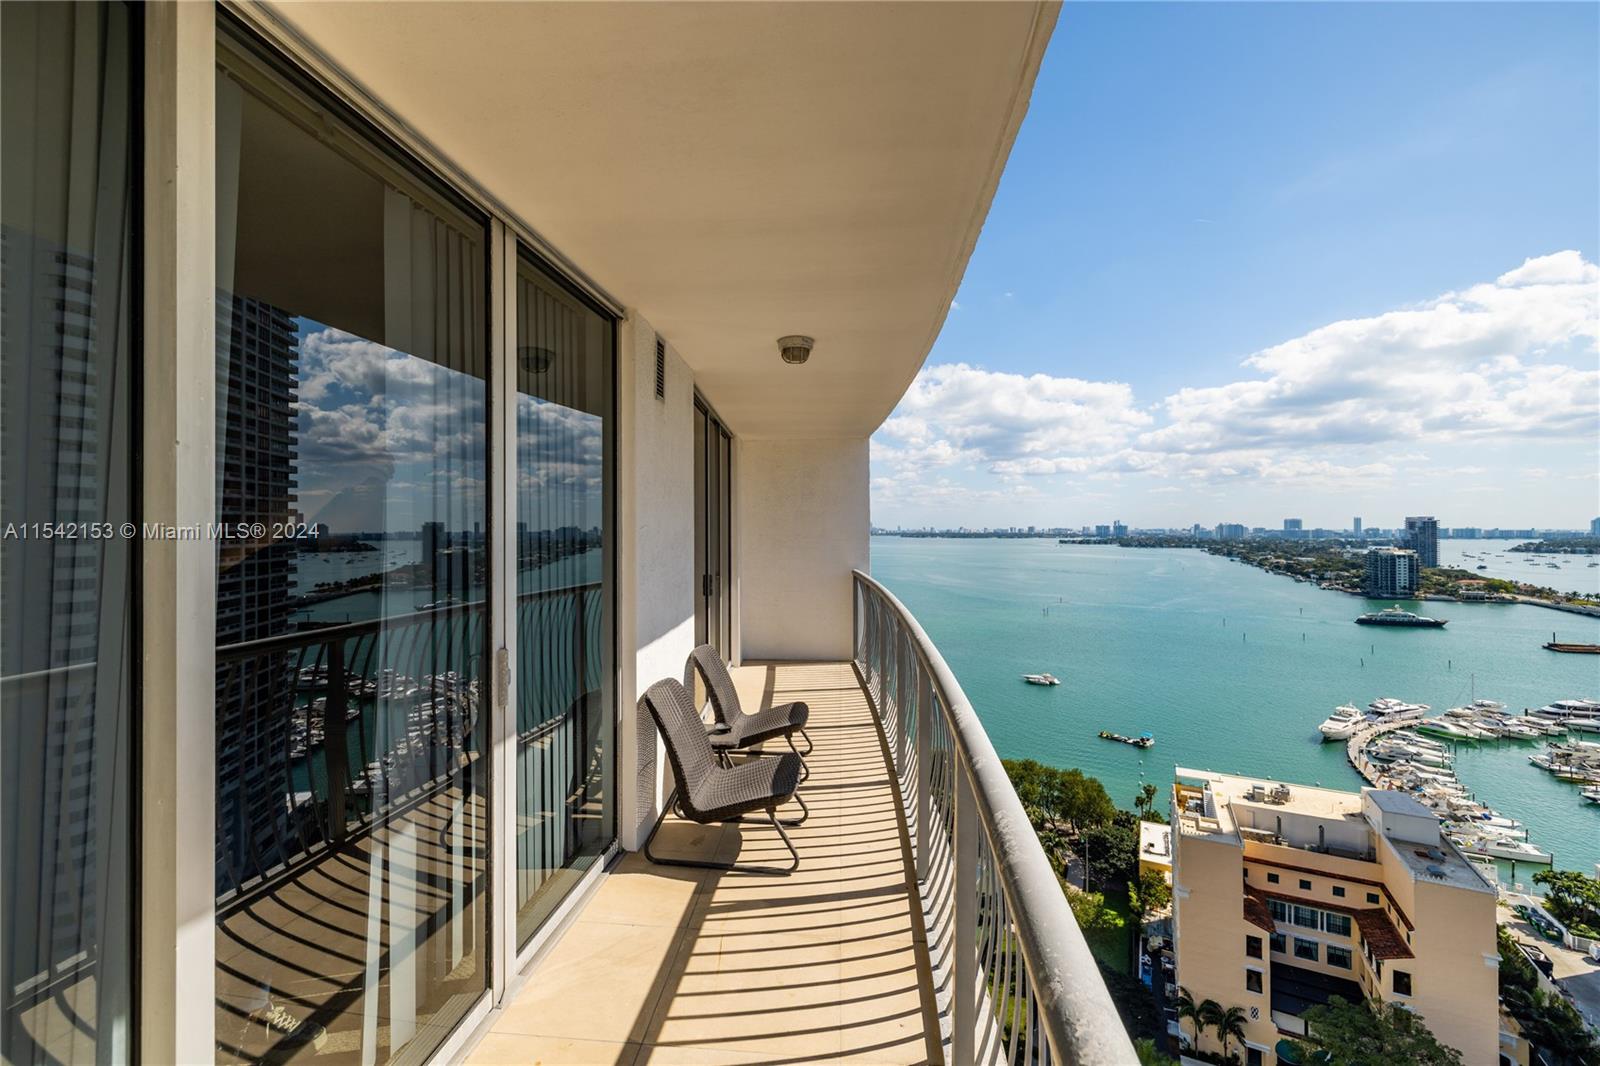 Welcome to this stunning 1-bedroom, 1-bathroom condo in the heart of Edgewater, offering breathtaking views of Miami Bay and downtown Miami. Spacious balcony accessible from both the living room and bedroom. Enjoy waking up to sunrise views over the water from the bedroom, while evenings offer a magical spectacle of downtown Miami's lights. With access to amenities including a fitness center, swimming pool, BBQ area, and business center. Be so close to the action and vibrant living of Miami, close to downtown Miami, Brickell, Wynwood, Midtown, Miami Beach, Design District, and a lot more.